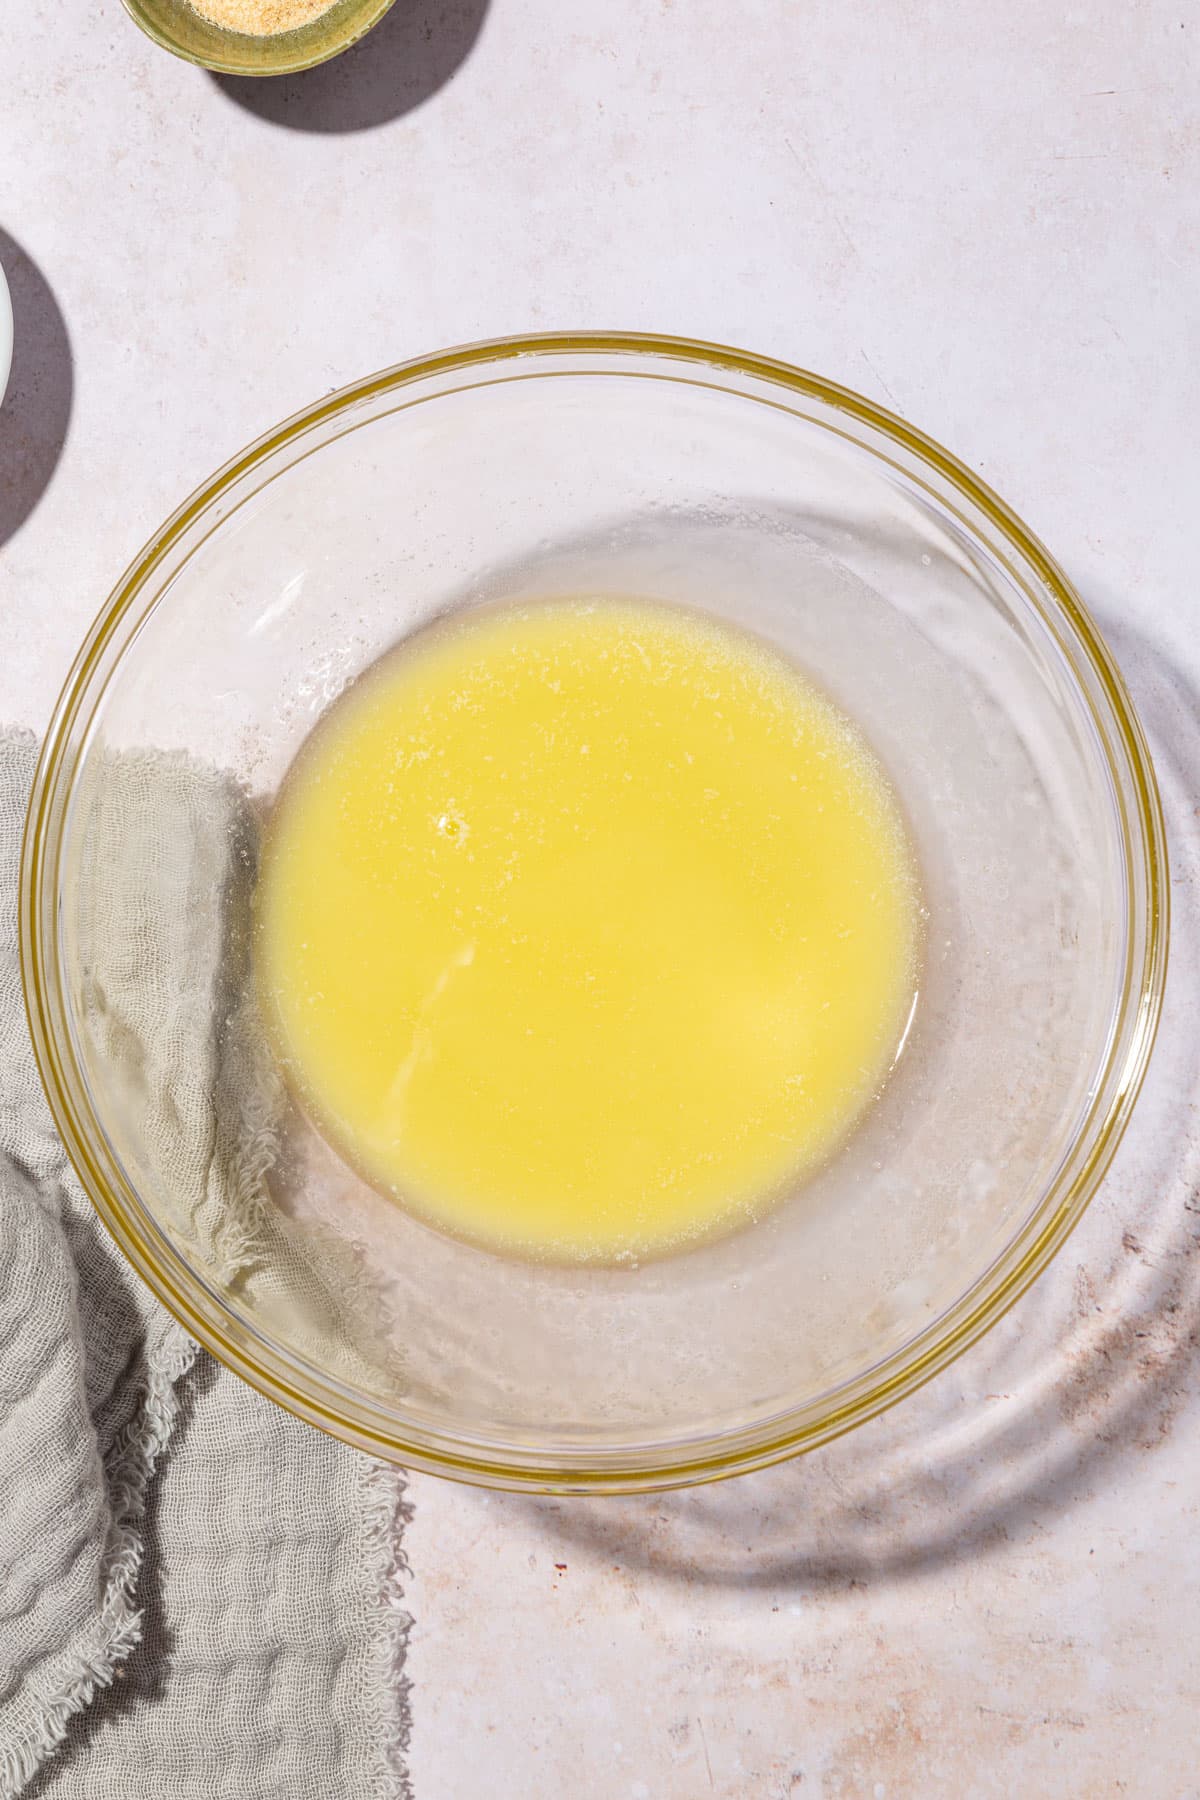 A glass mixing bowl with melted butter in it.